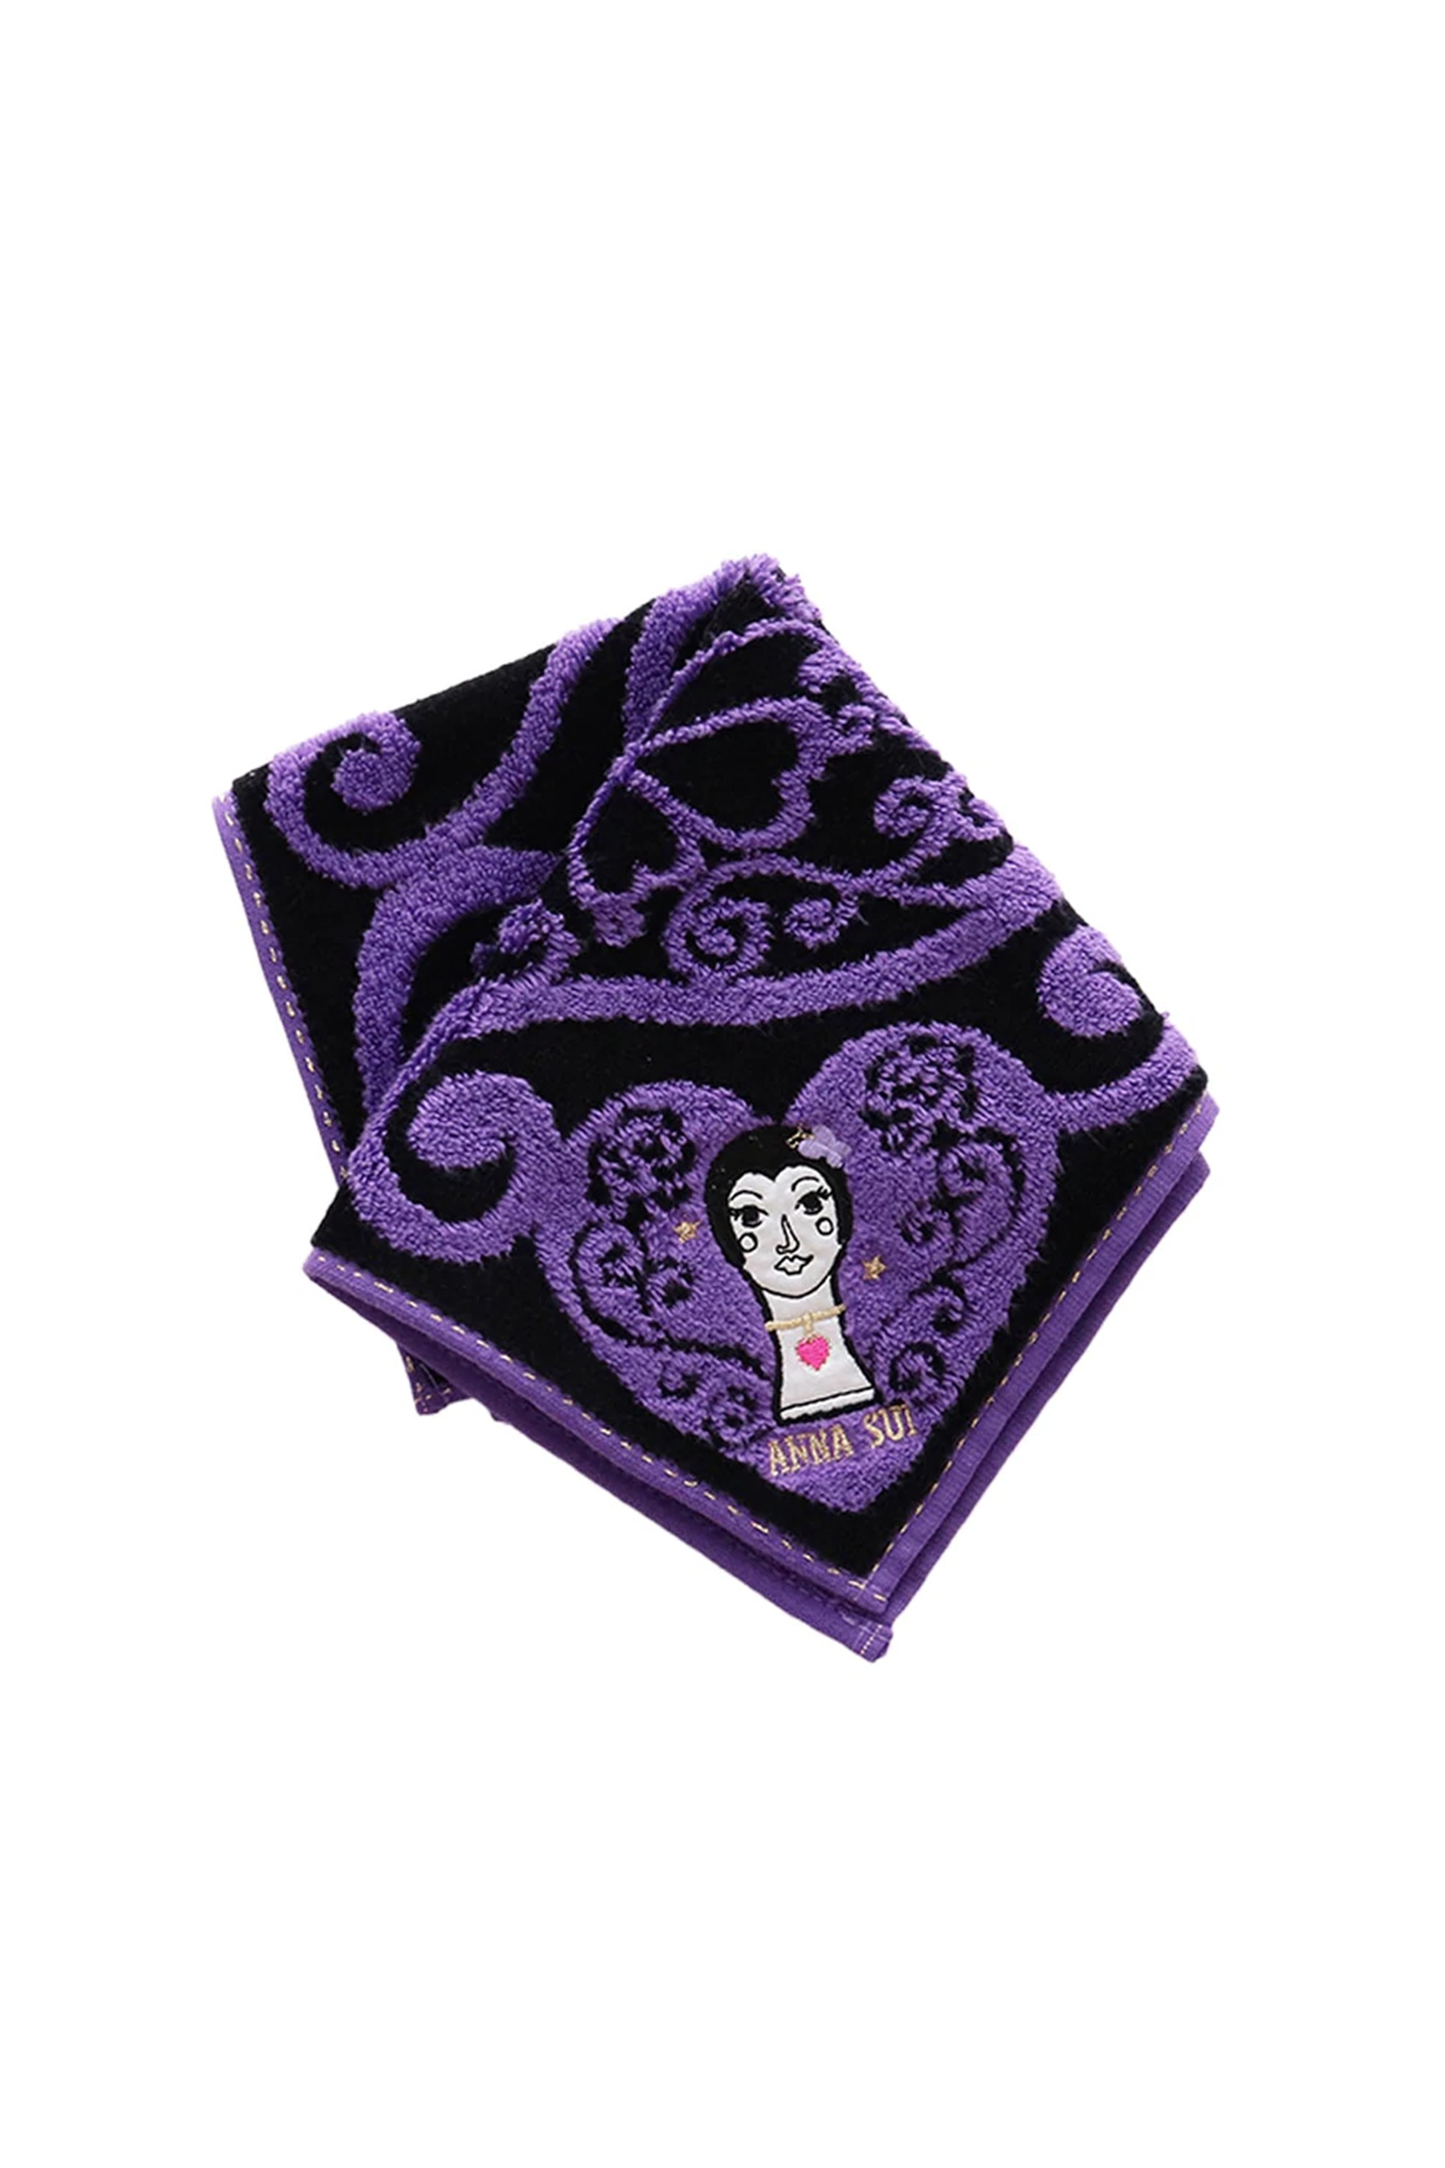 Dolly Head Washcloth, black, embroidery purple heart in corners with and Anna Sui’s doll inside